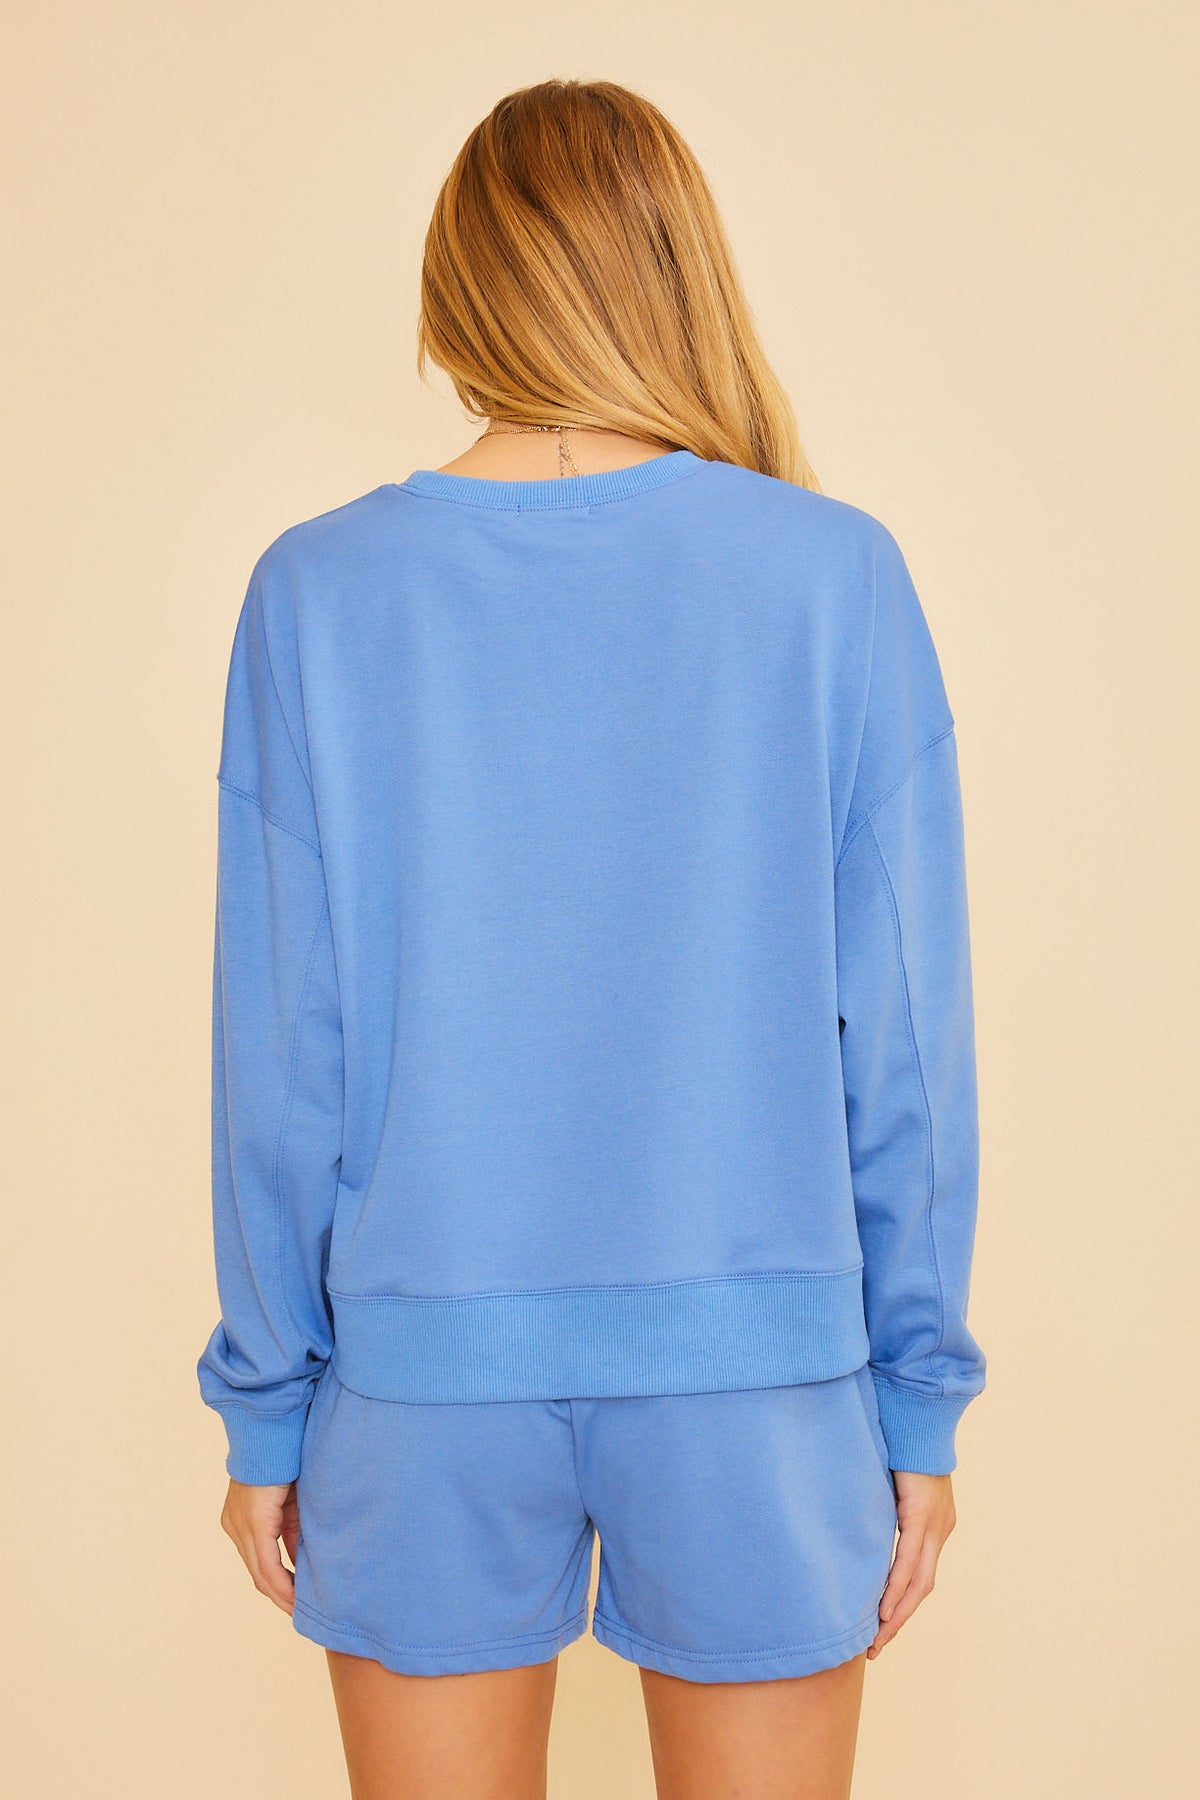 "Be Happy" Embroidered Sweatshirt - Blue